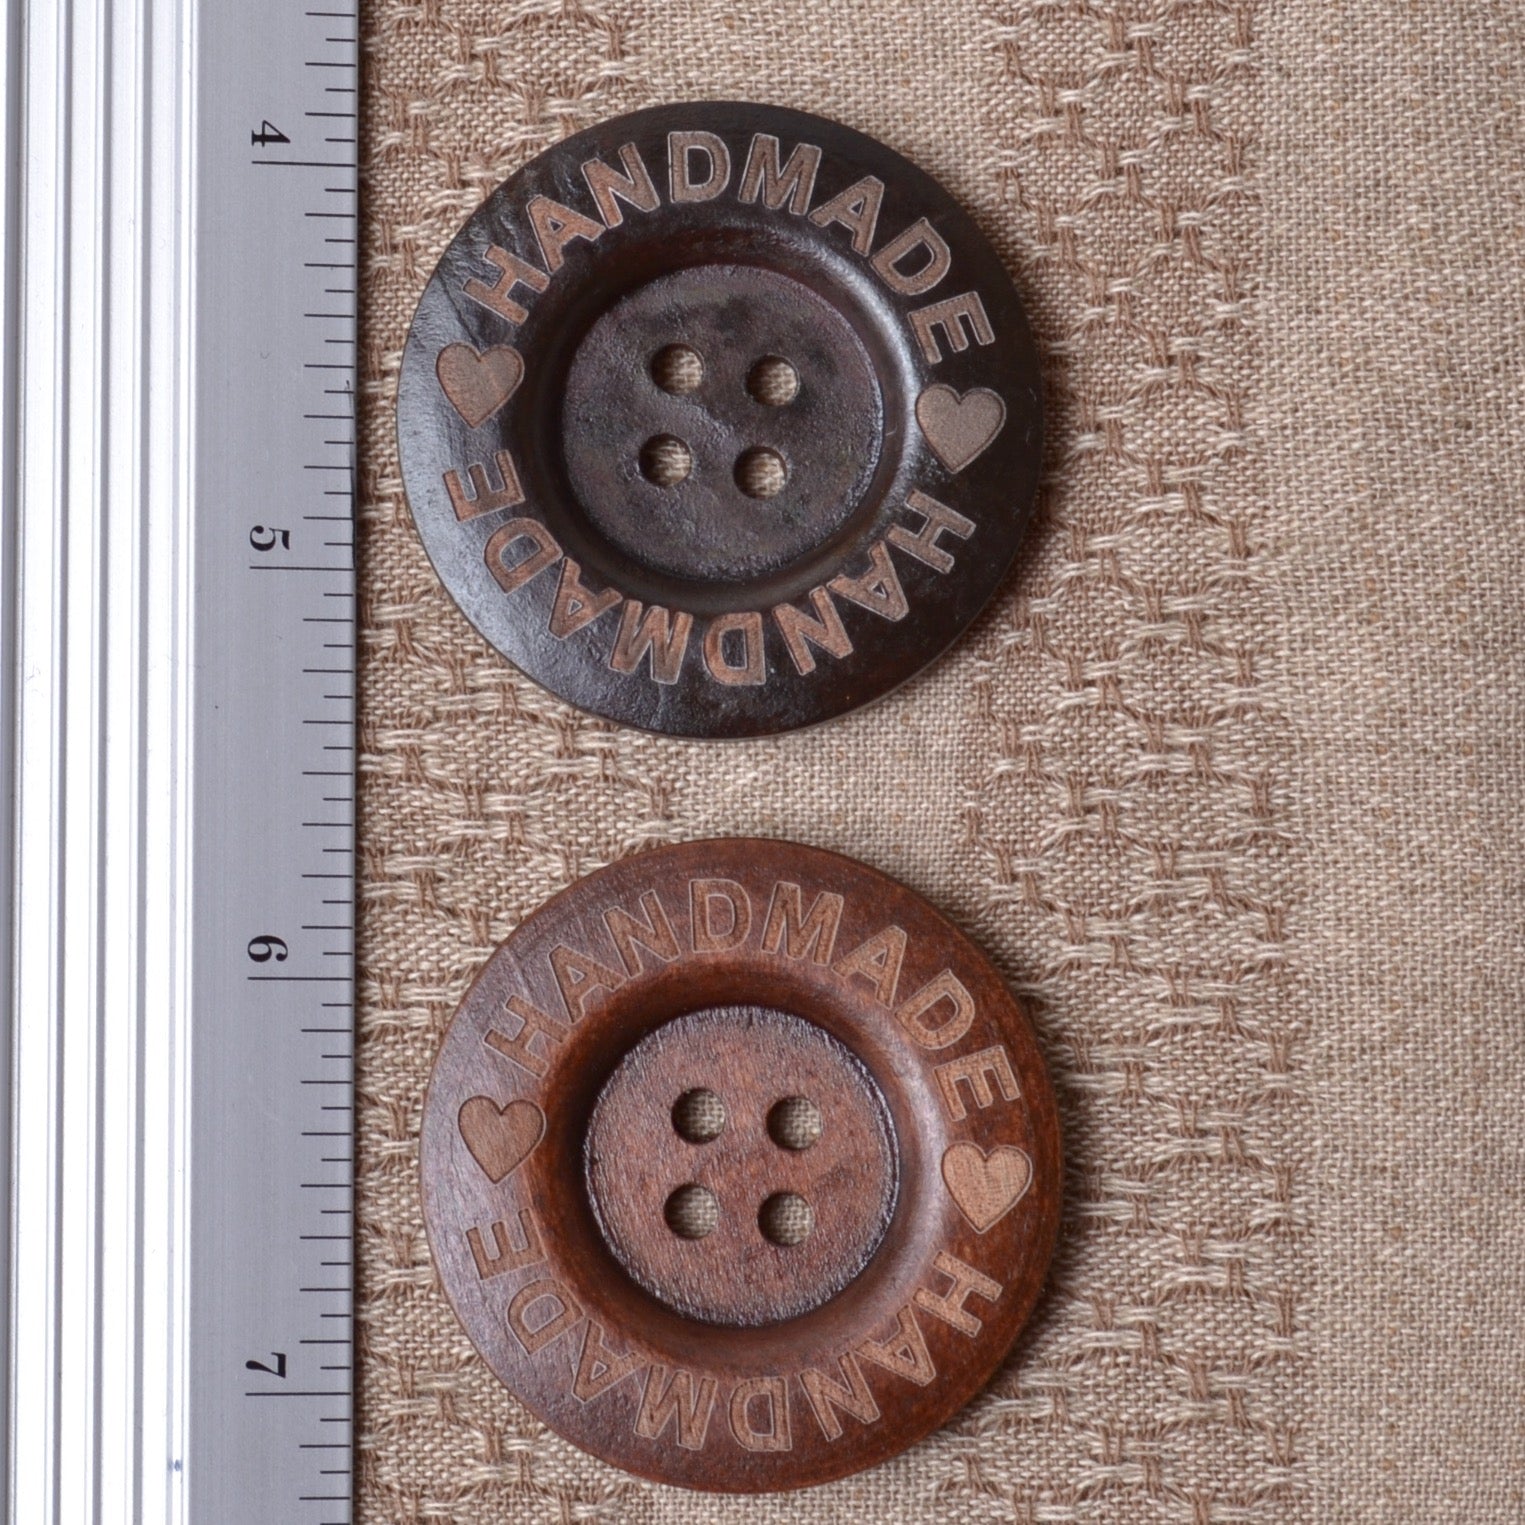 wood buttons